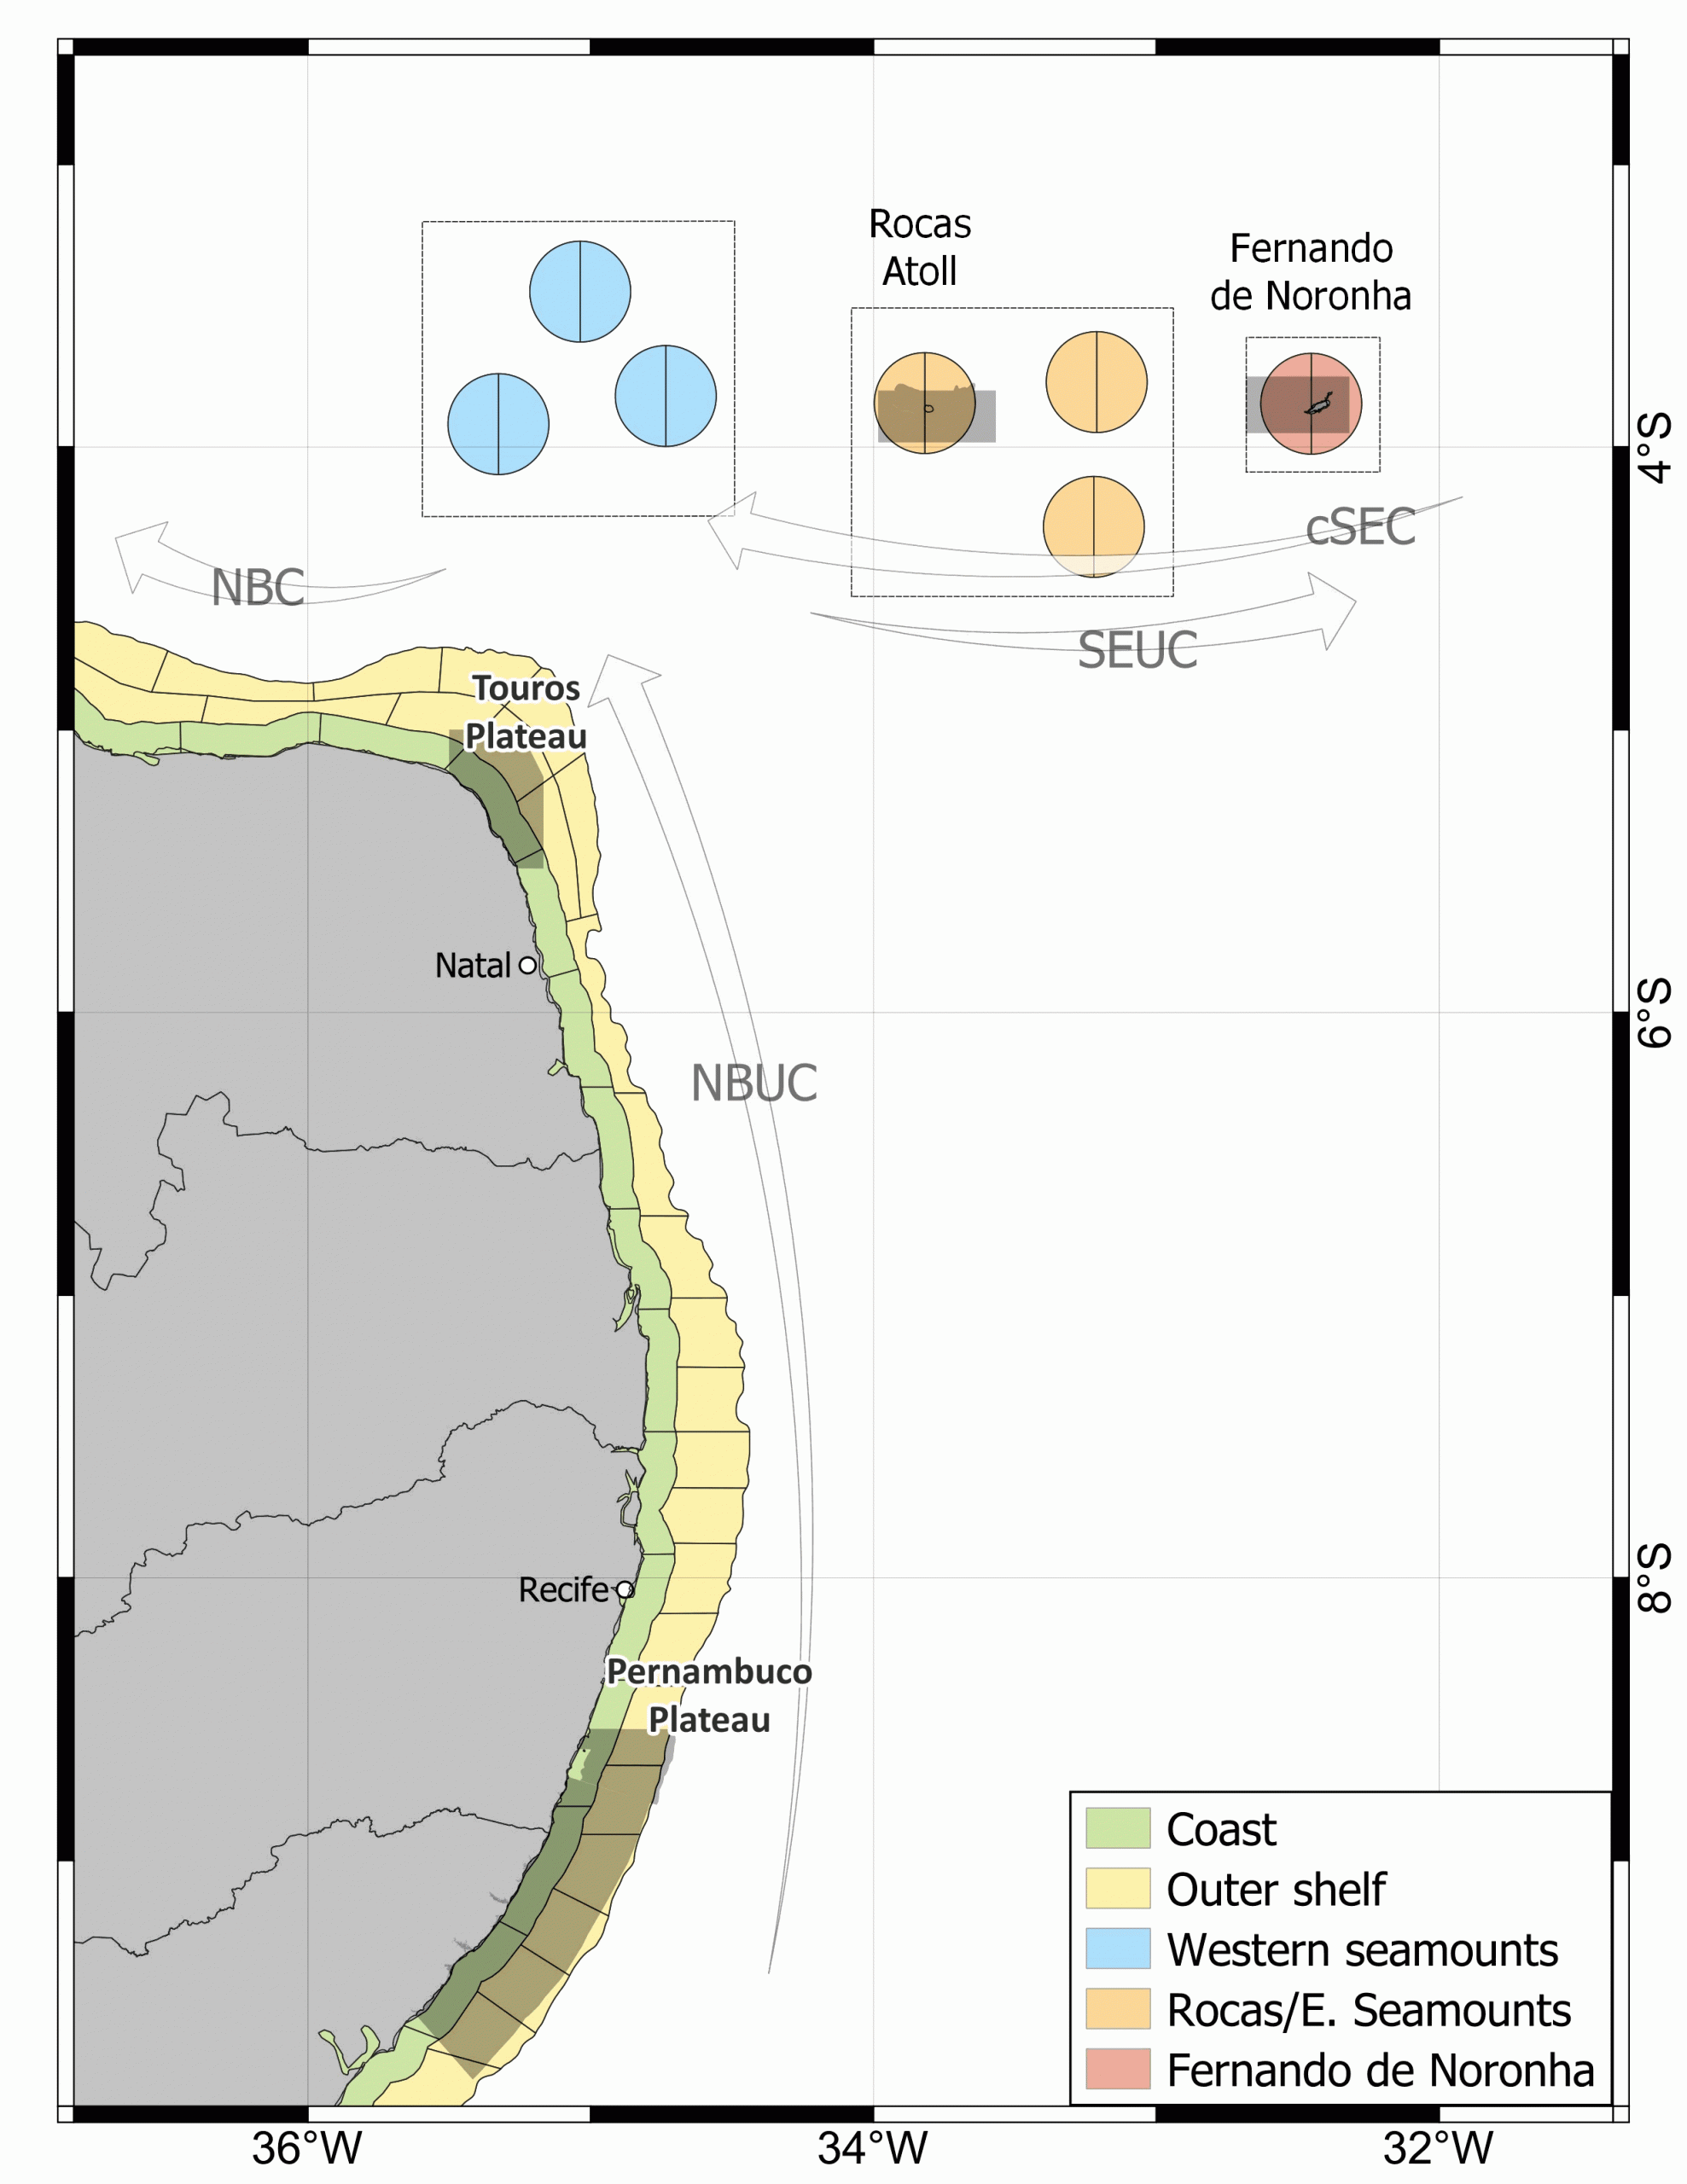 Processed outputs from a Lagrangian dispersal experiment testeing the effect of diel vertical migration in the Tropical Southwestern Atlantic